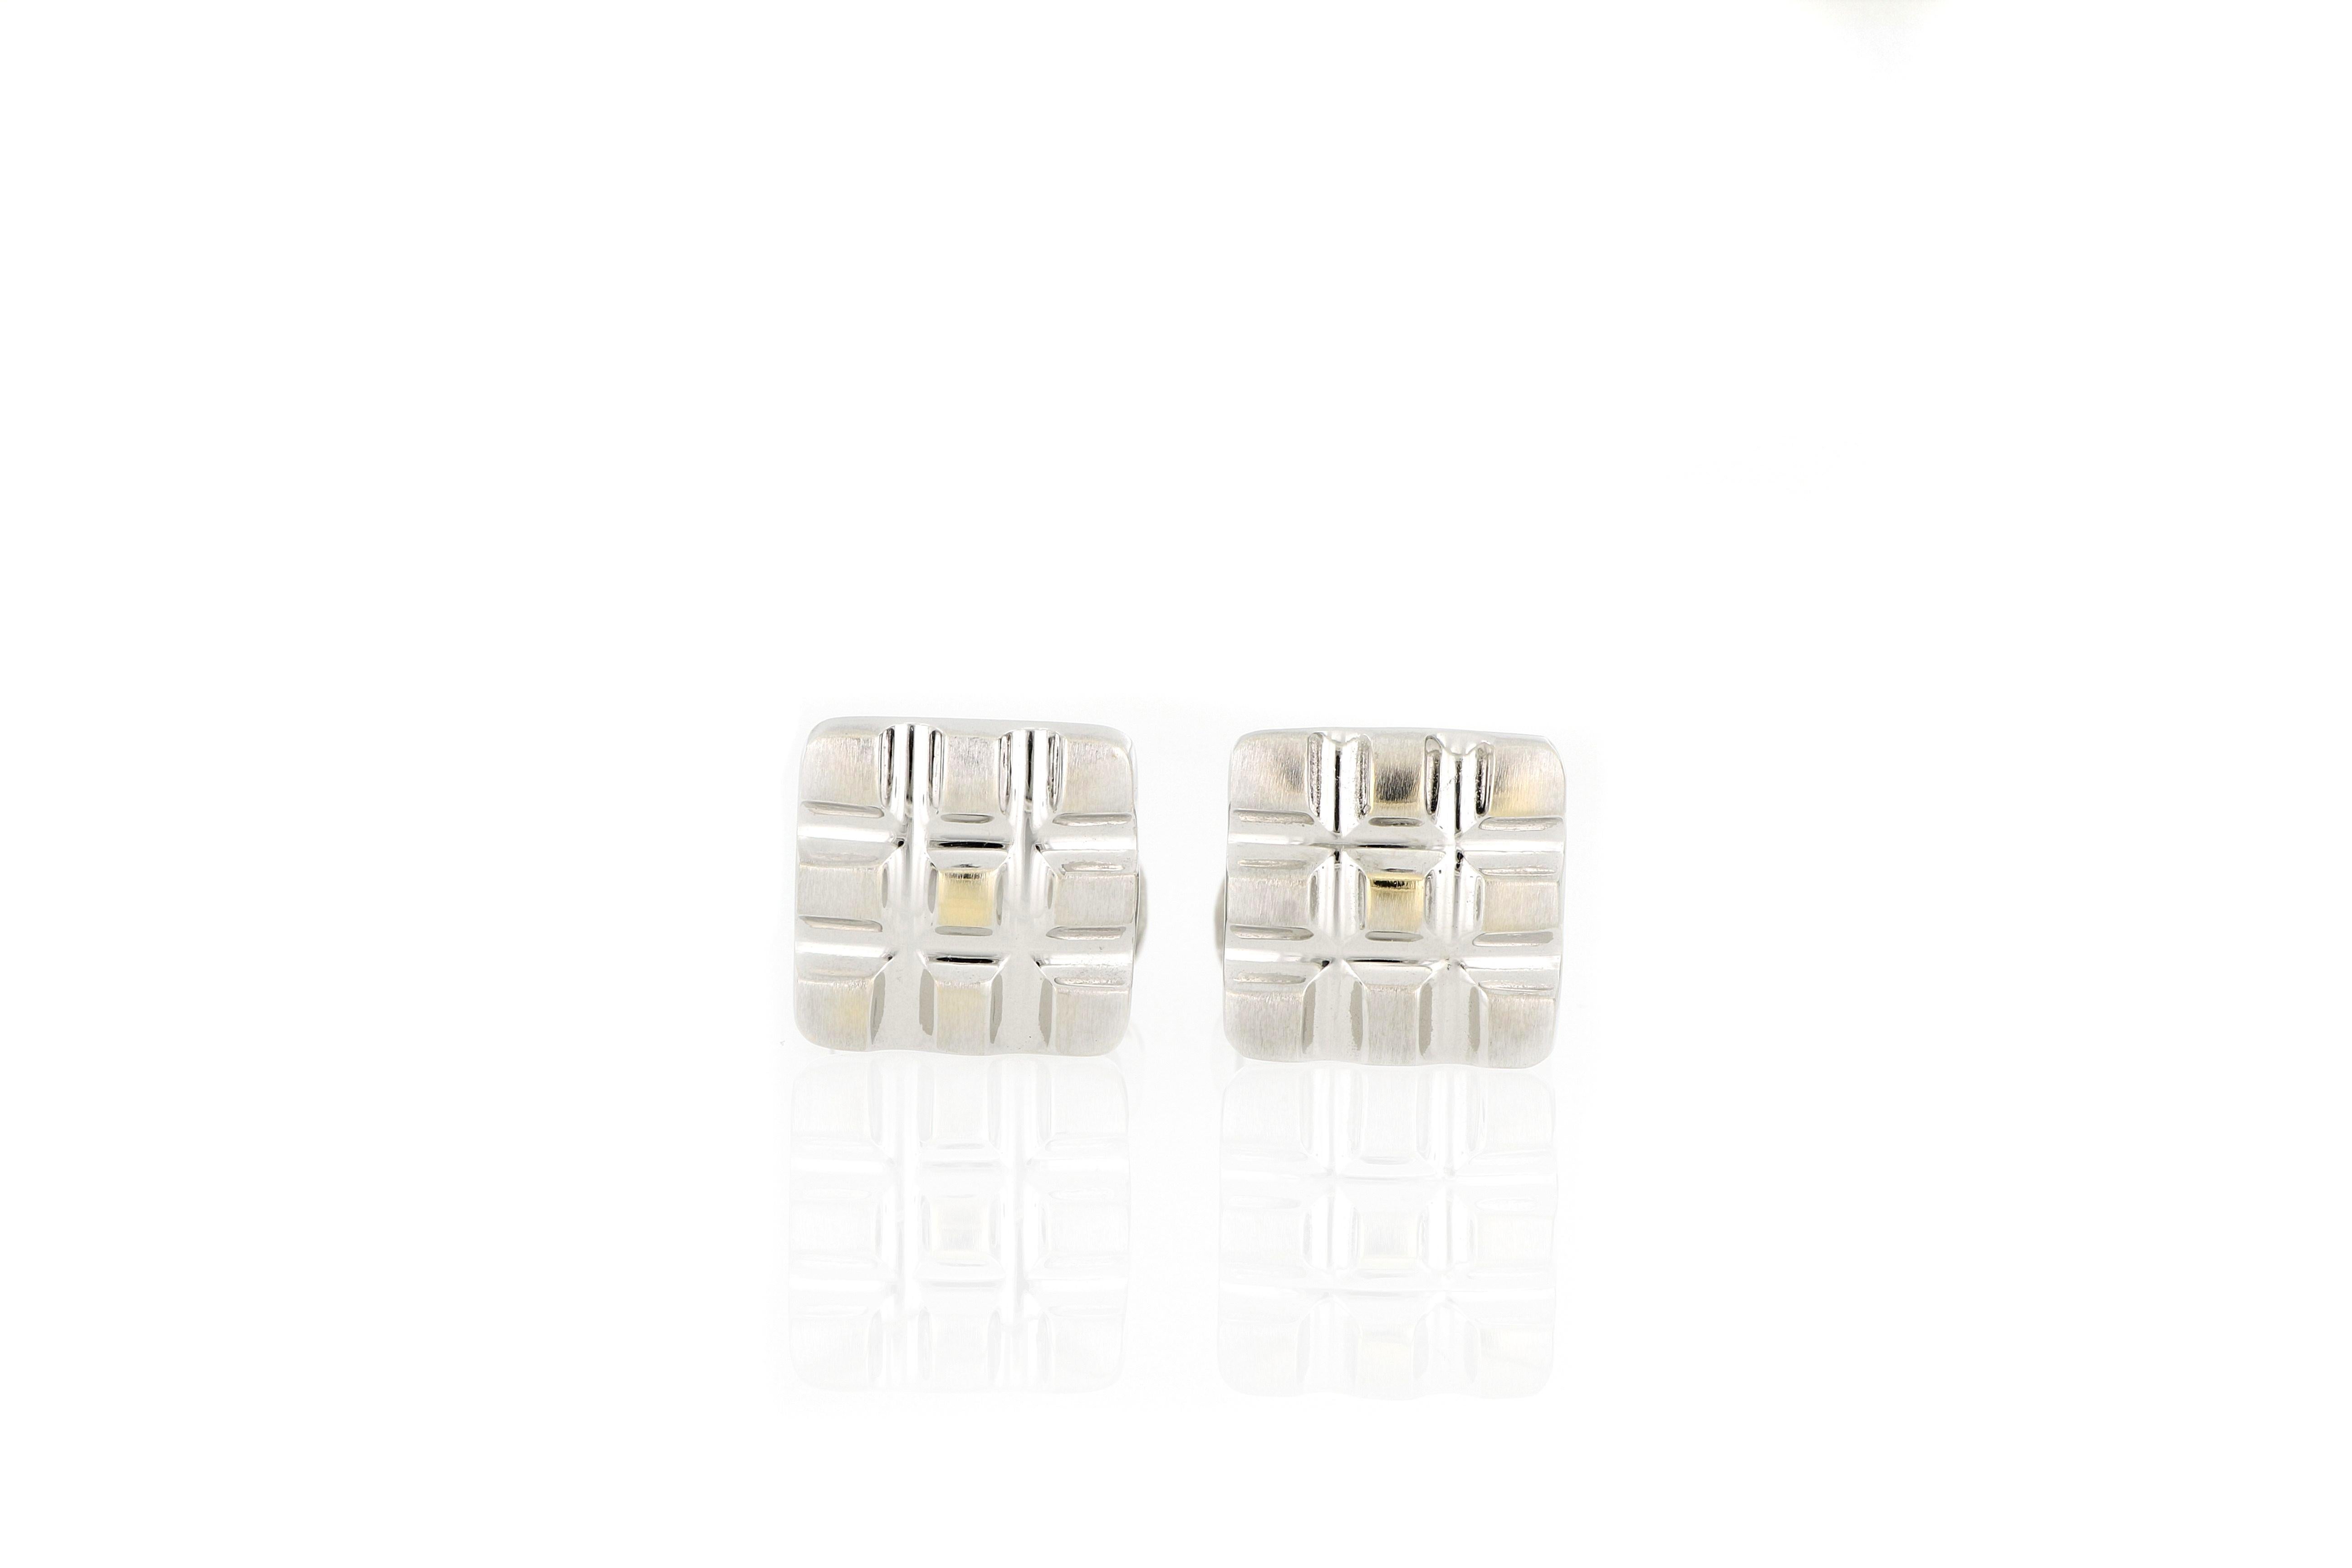  This pair of cufflinks are made of 18K white gold, designed and made in Italy, simple and elegant, matching different style of suits and shirts.
The company was founded one and a half centuries ago in Macau. The brand is renowned for its high